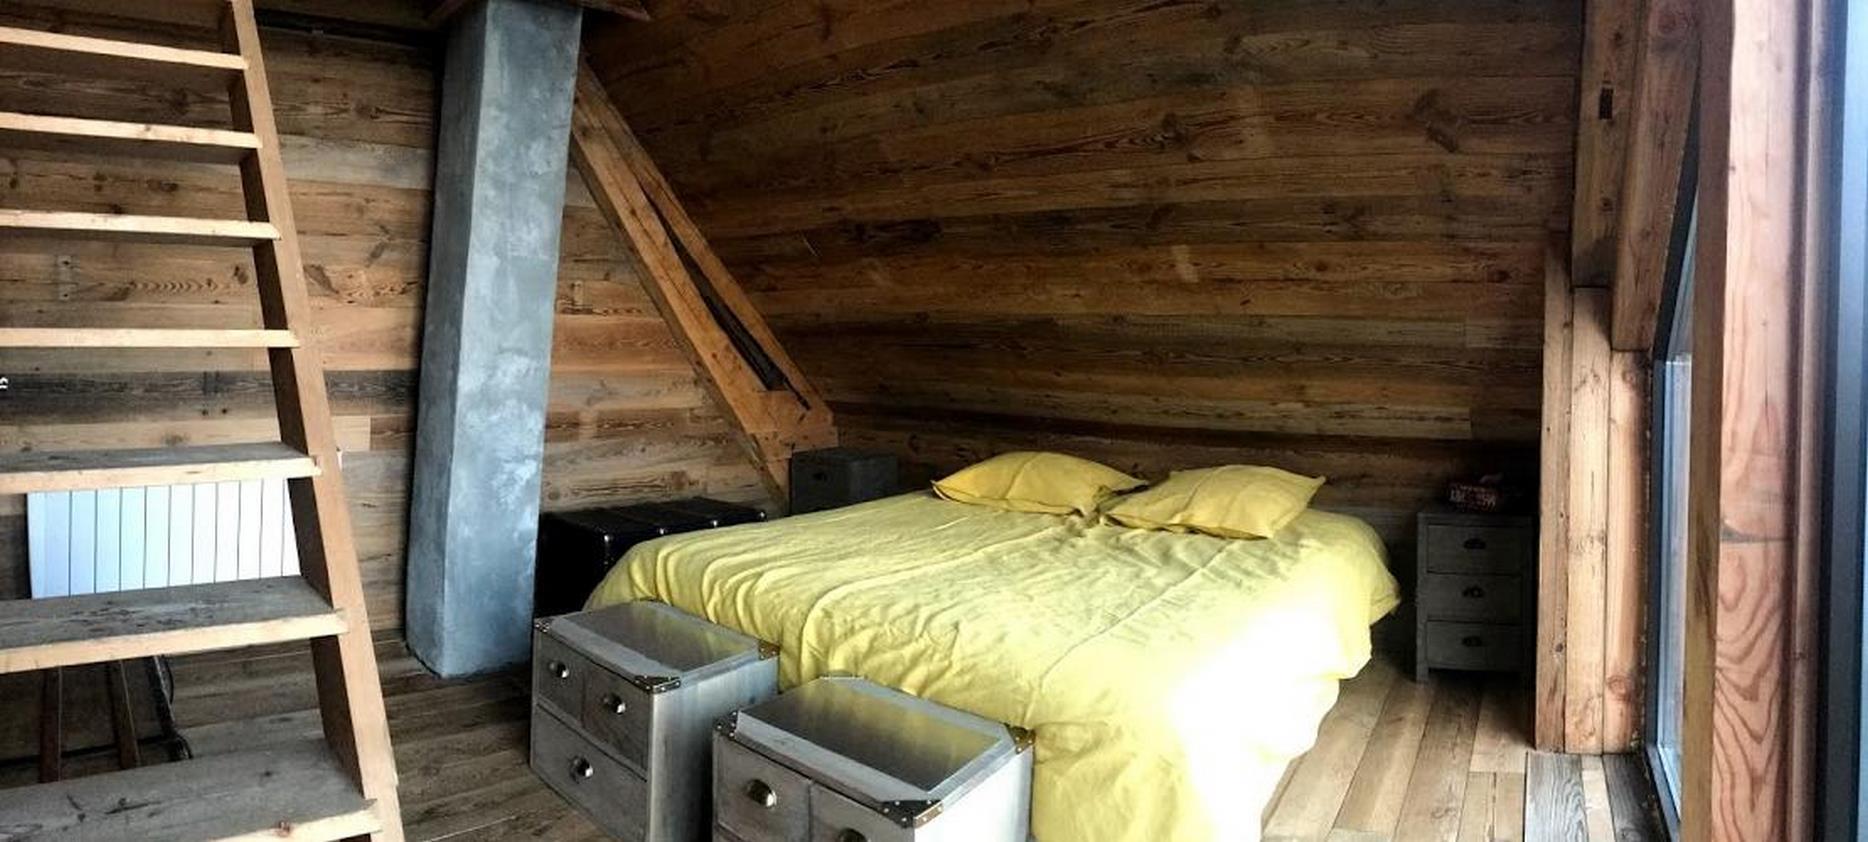 Super Besse Chalet - bedroom for 1/2 people in a King Size bed configuration in Super Besse